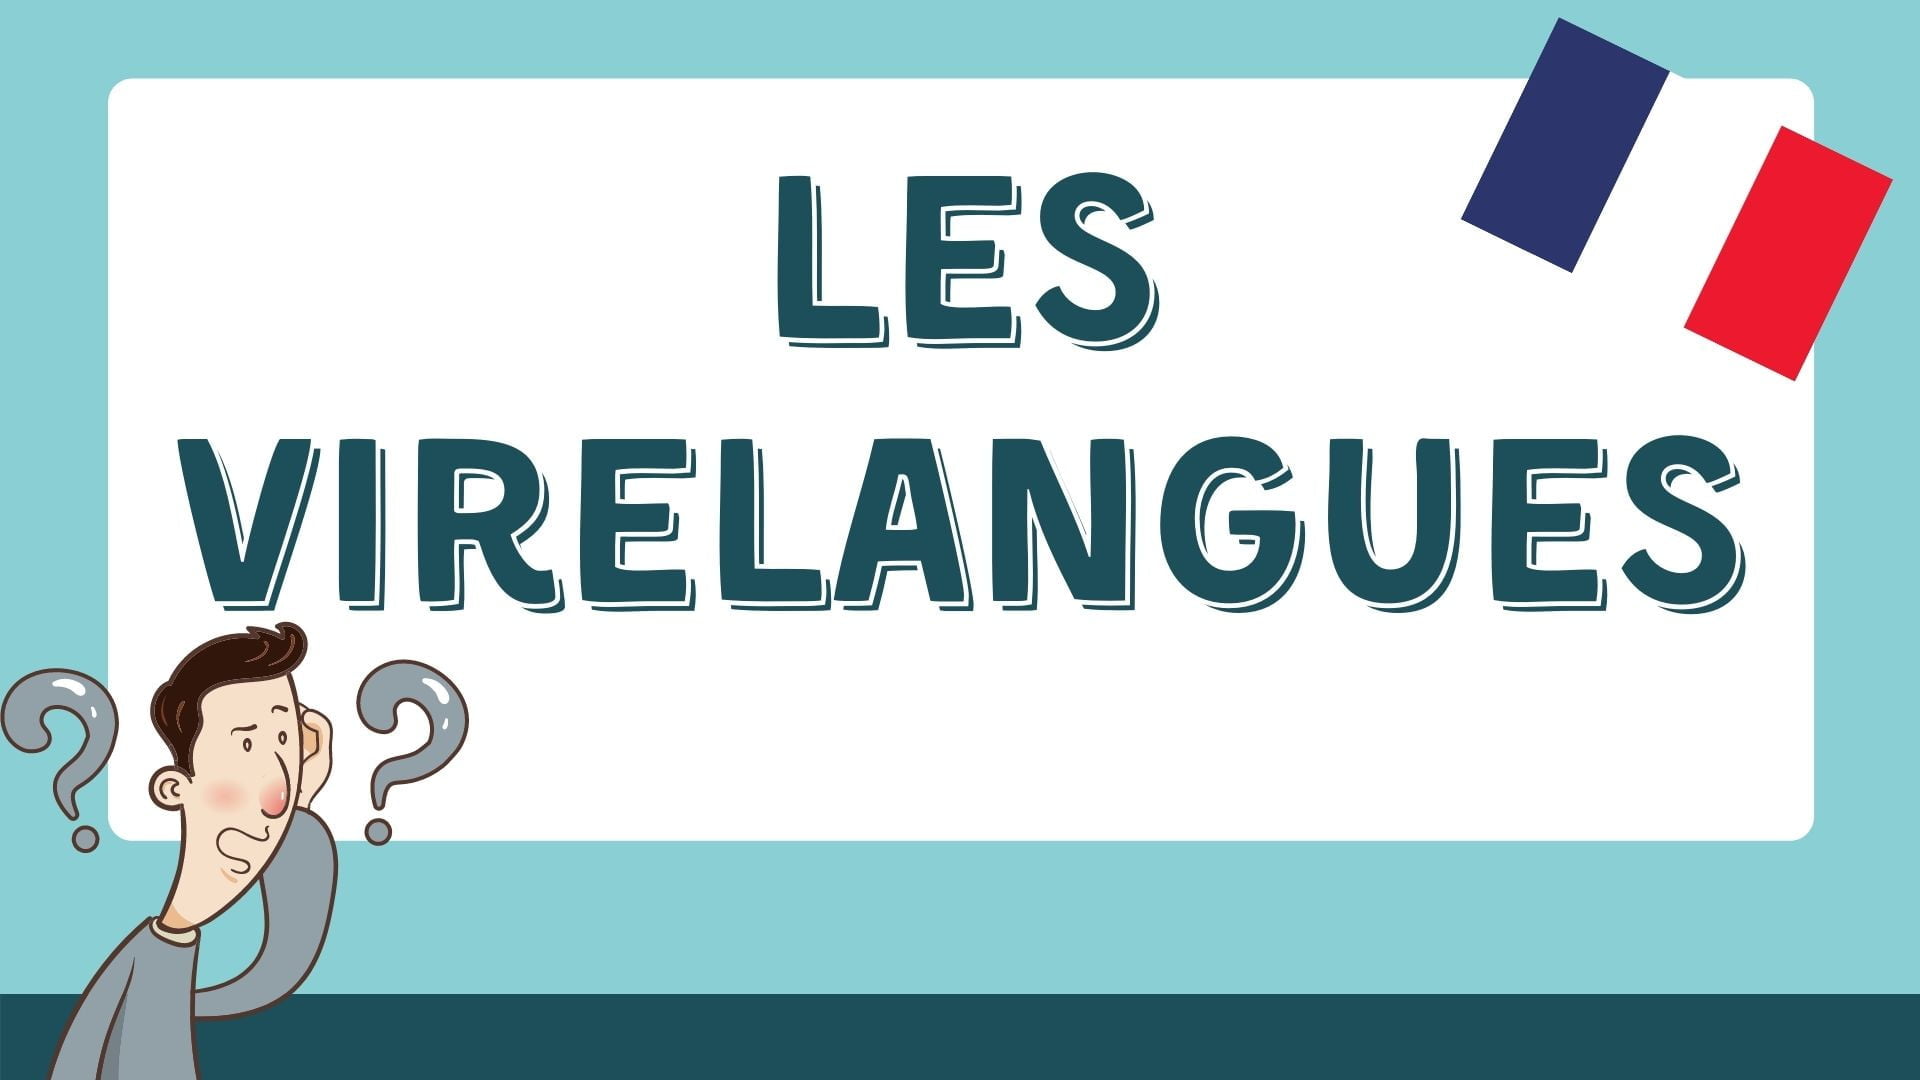 French tongue twisters - Les virelangues